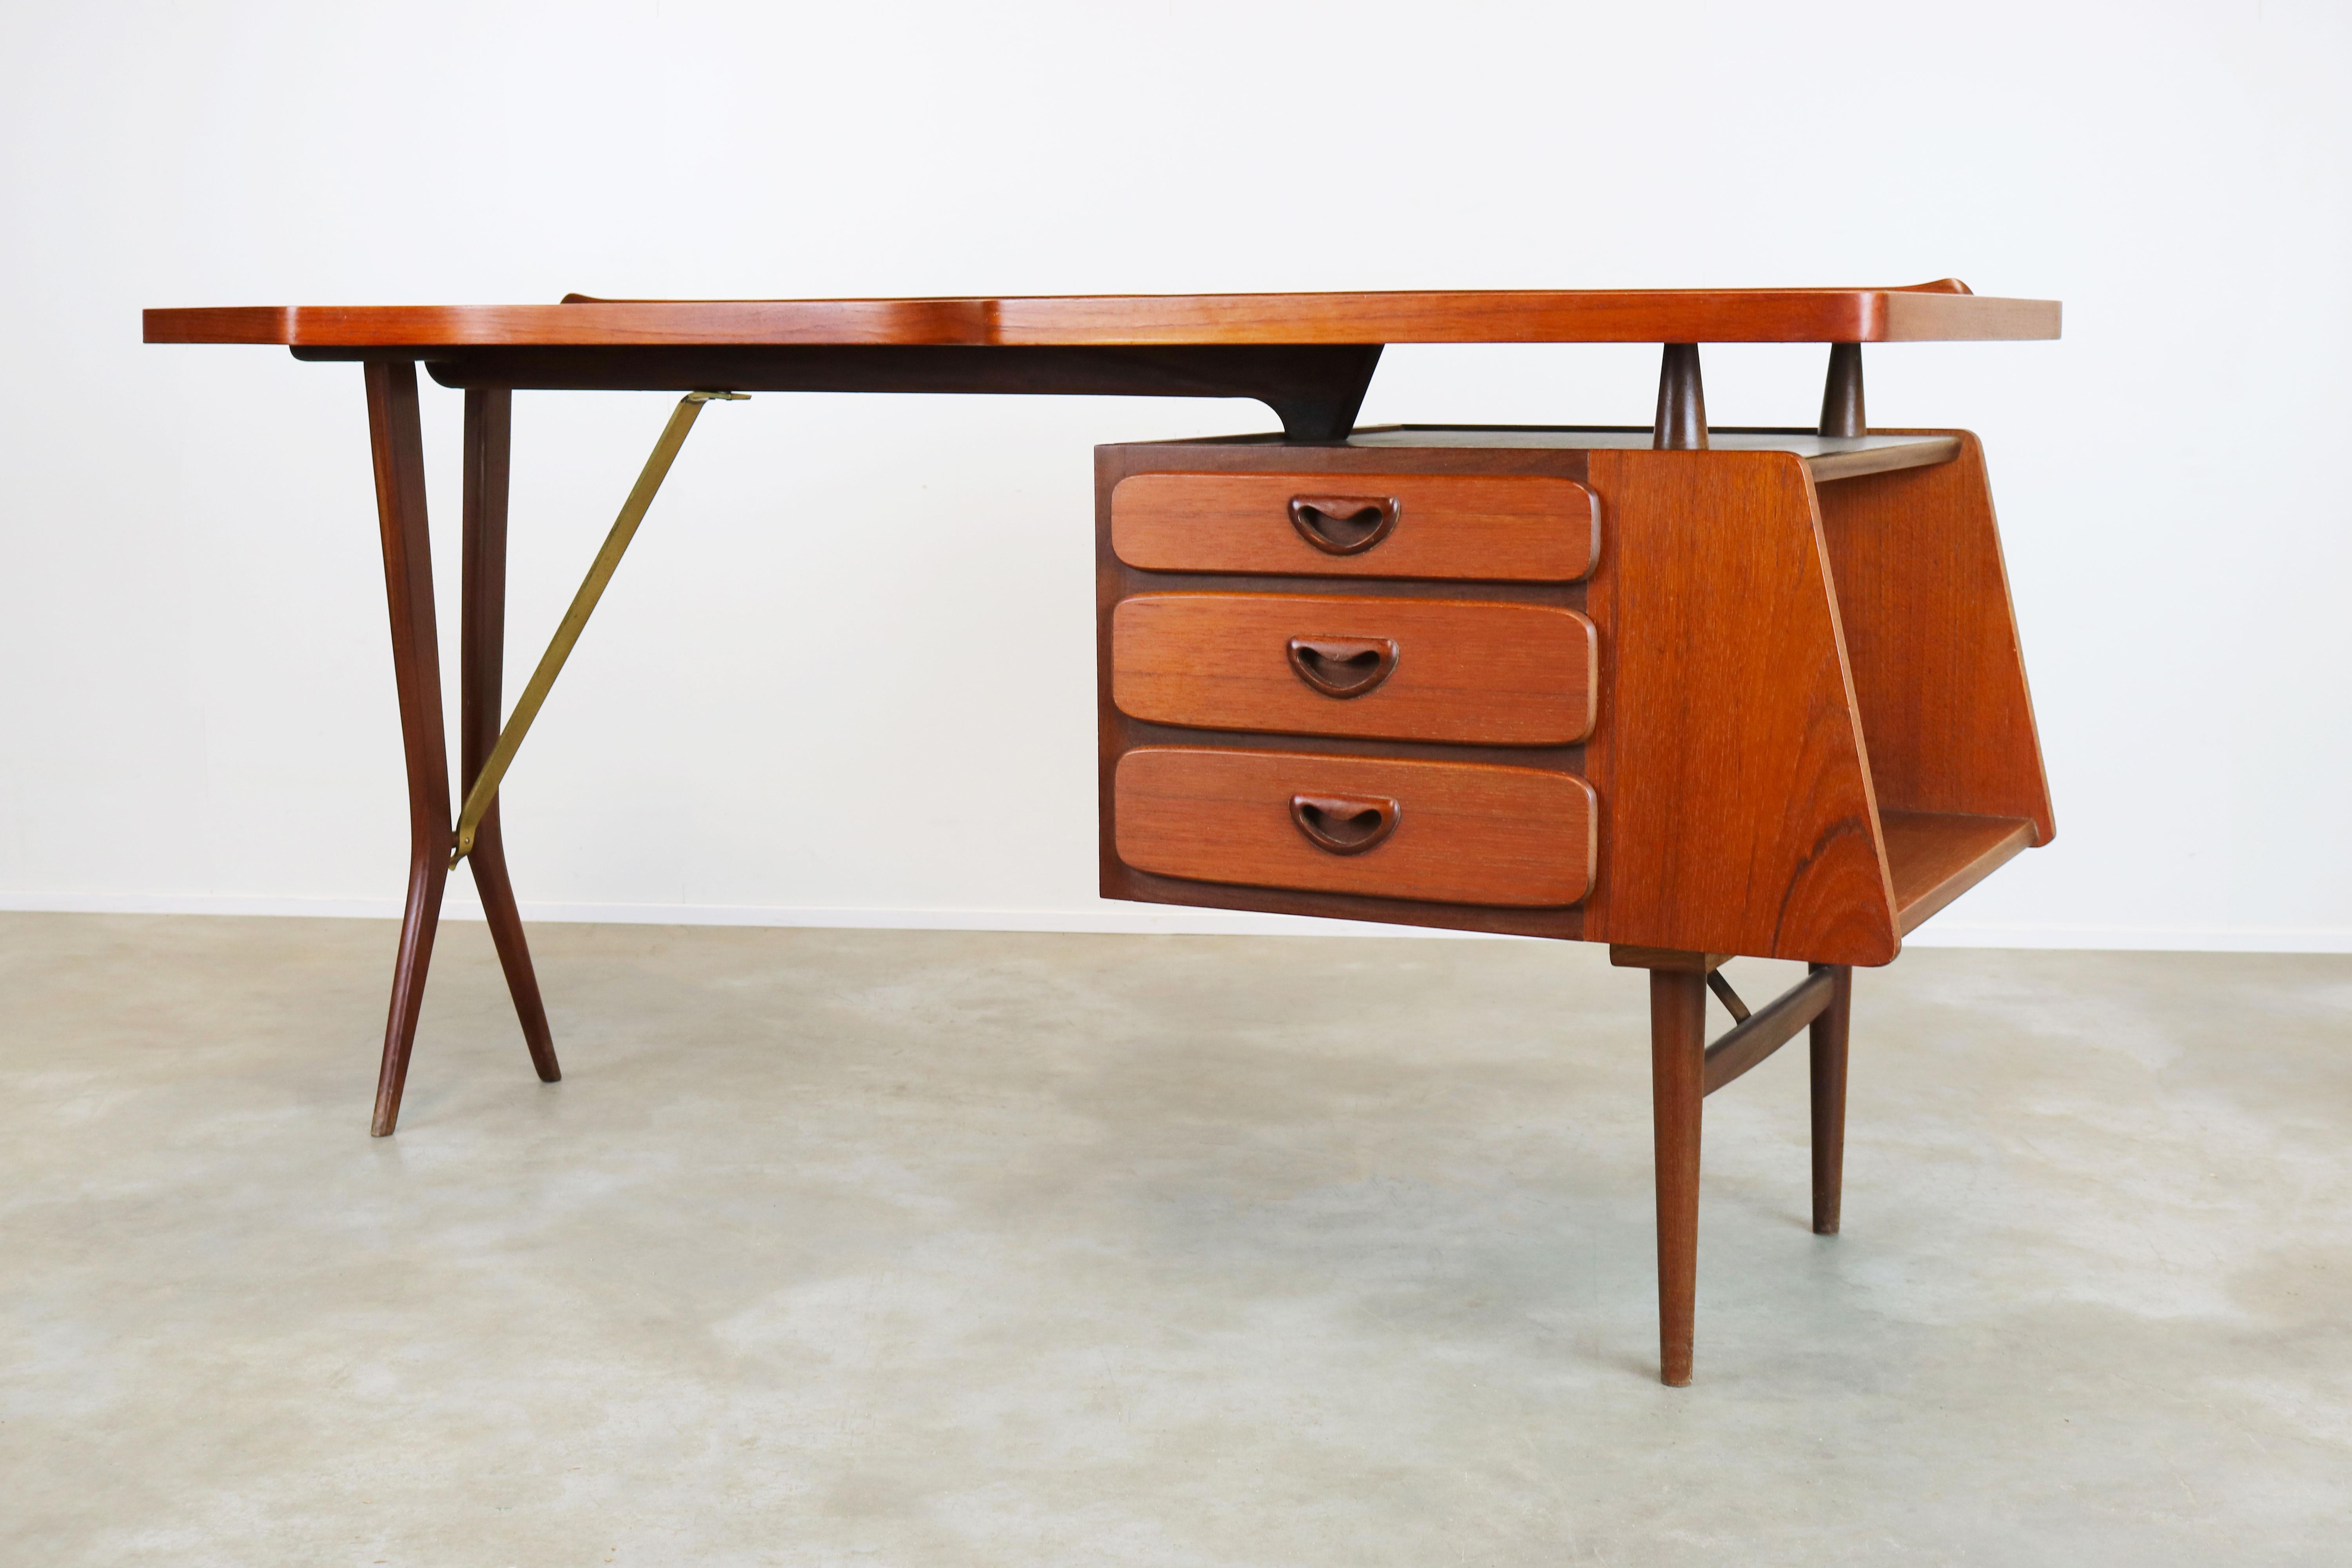 Rare and magnificent desk designed by Louis Van Teeffelen for Webe in 1952.
This is one of Louis van Teeffelens first designs and the reason he became a world famous designer. Very desired among collectors, the lines of this desk are a stunning